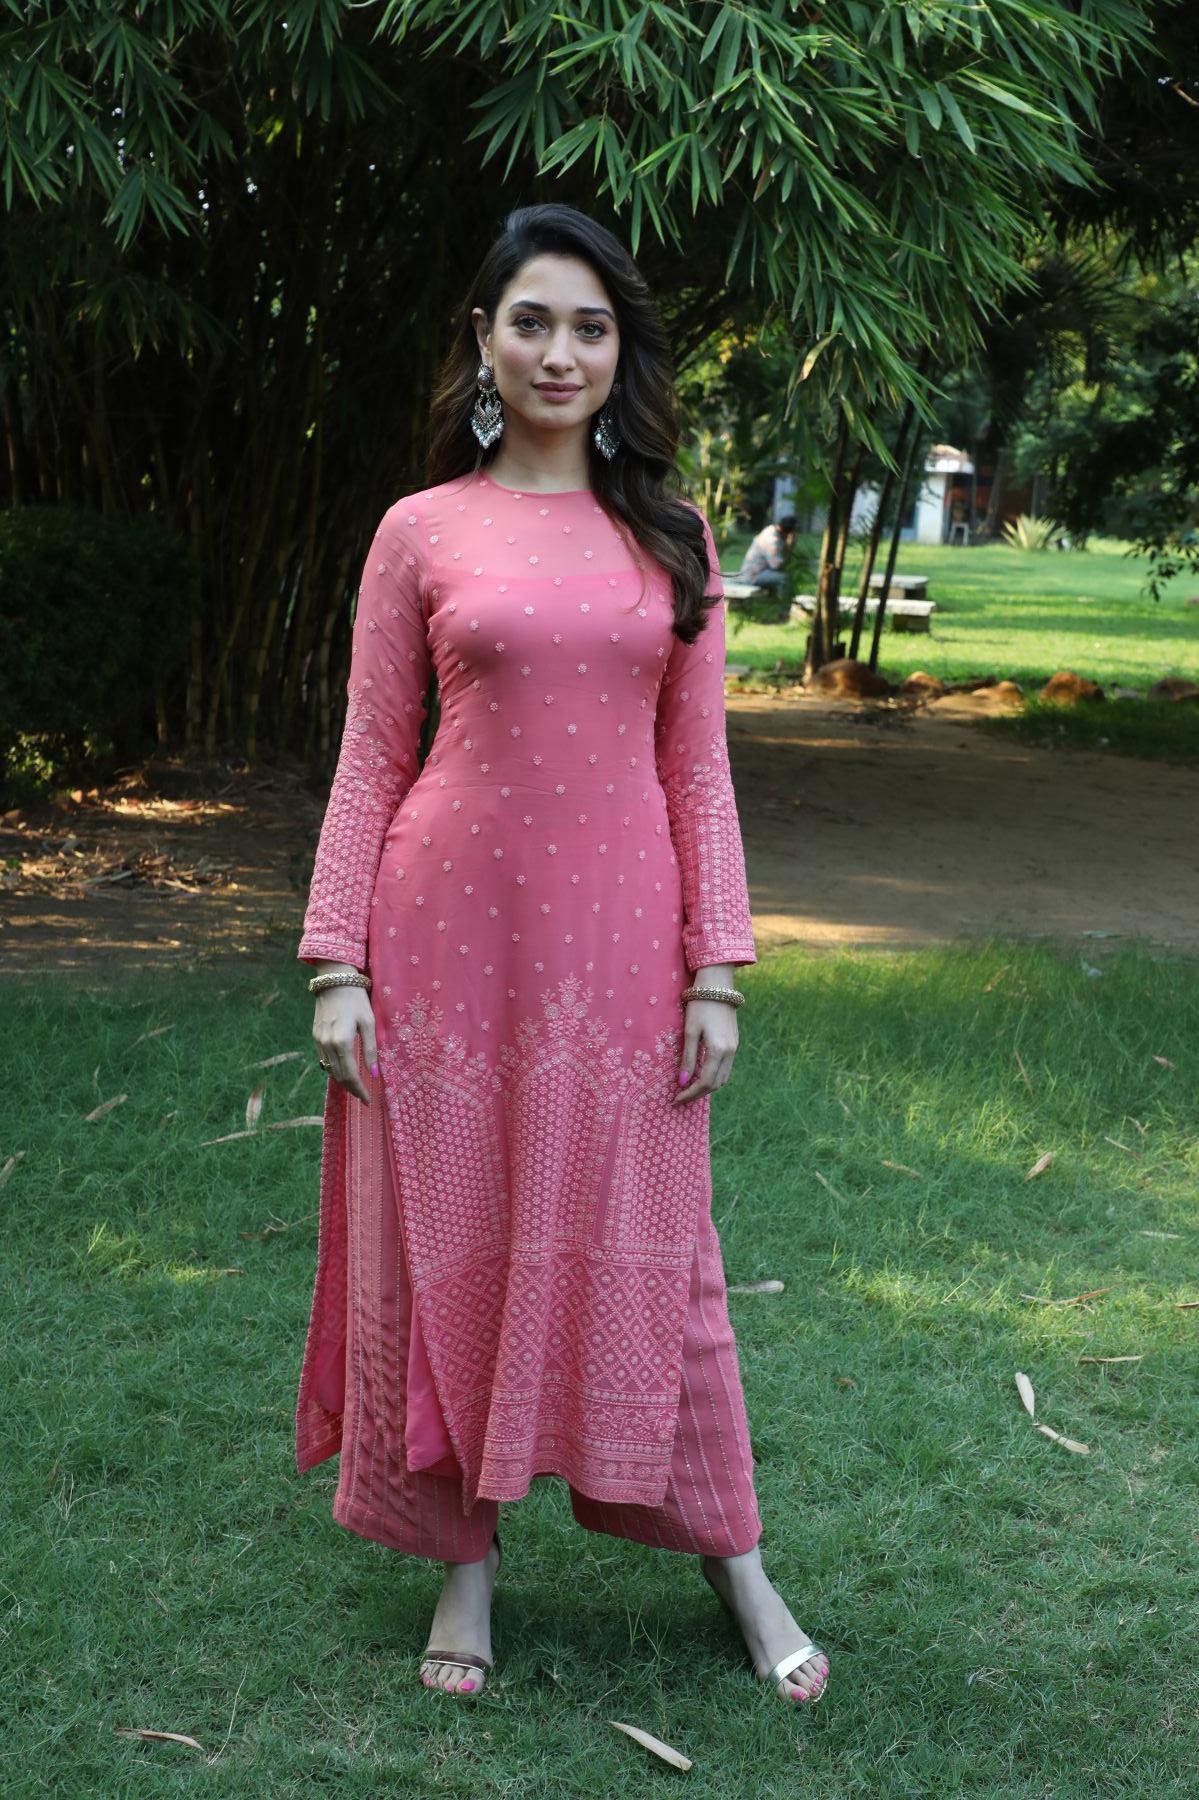 Nepotism will be there. Need to stay focussed – Tamannaah